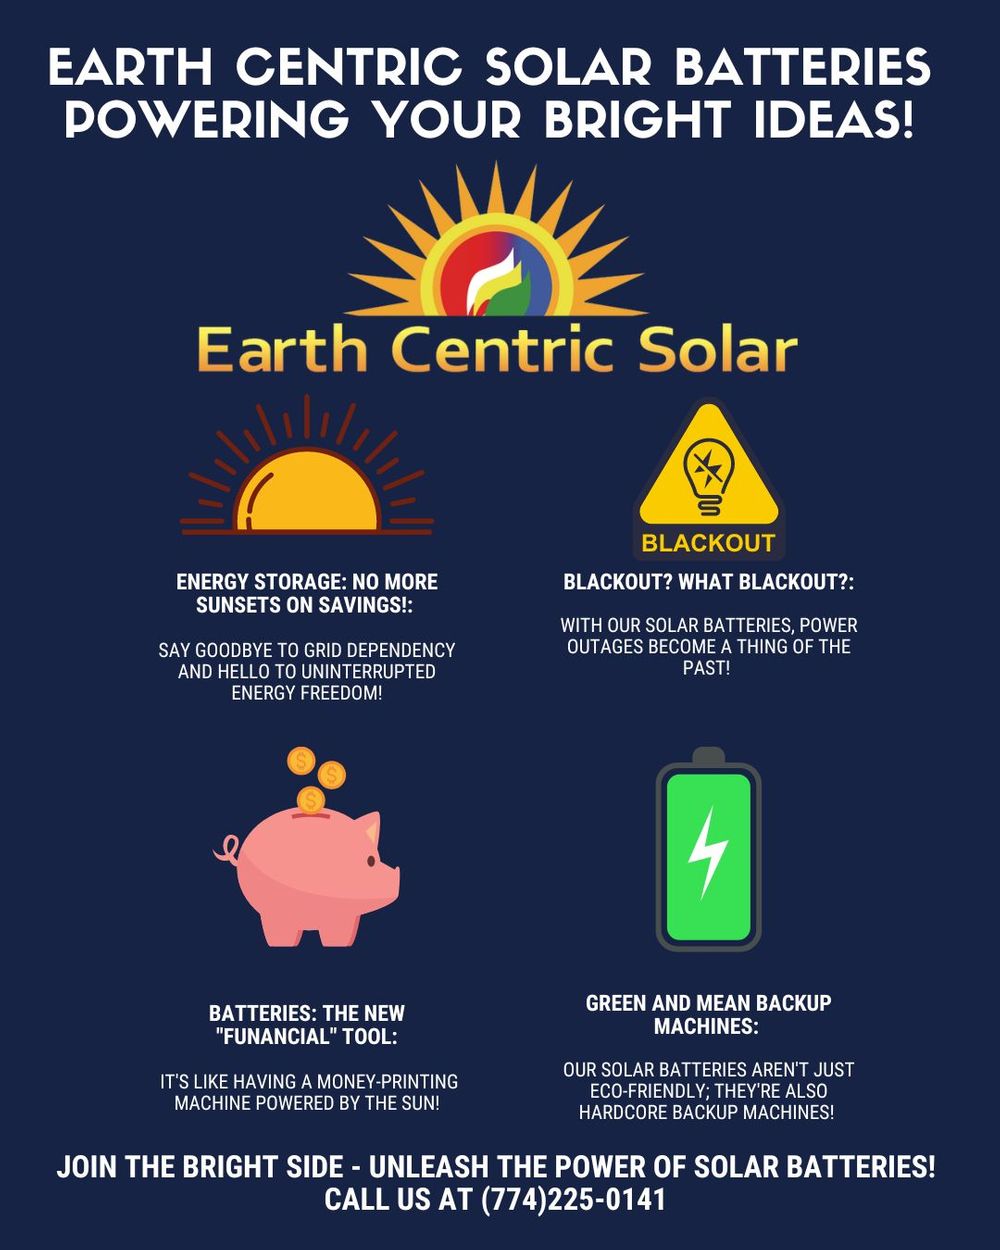 Earth Centric Solar Batteries Powering Your Bright Ideas.jpg